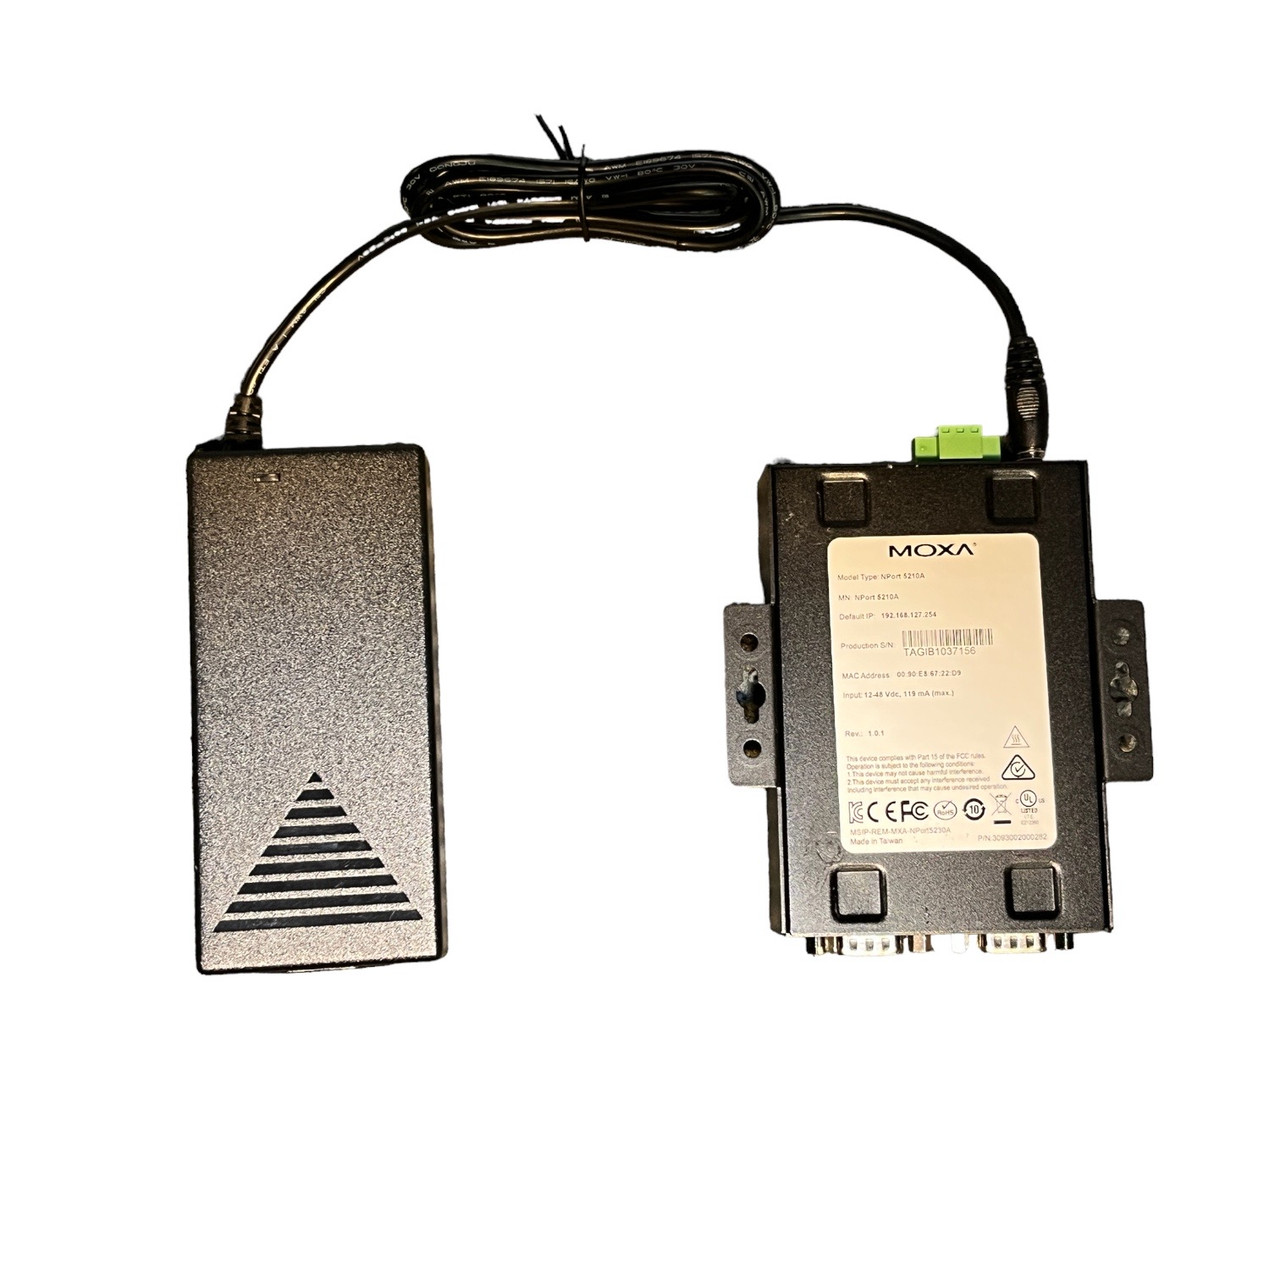 MOXA Nport 5130 Serial to Ethernet Device Server